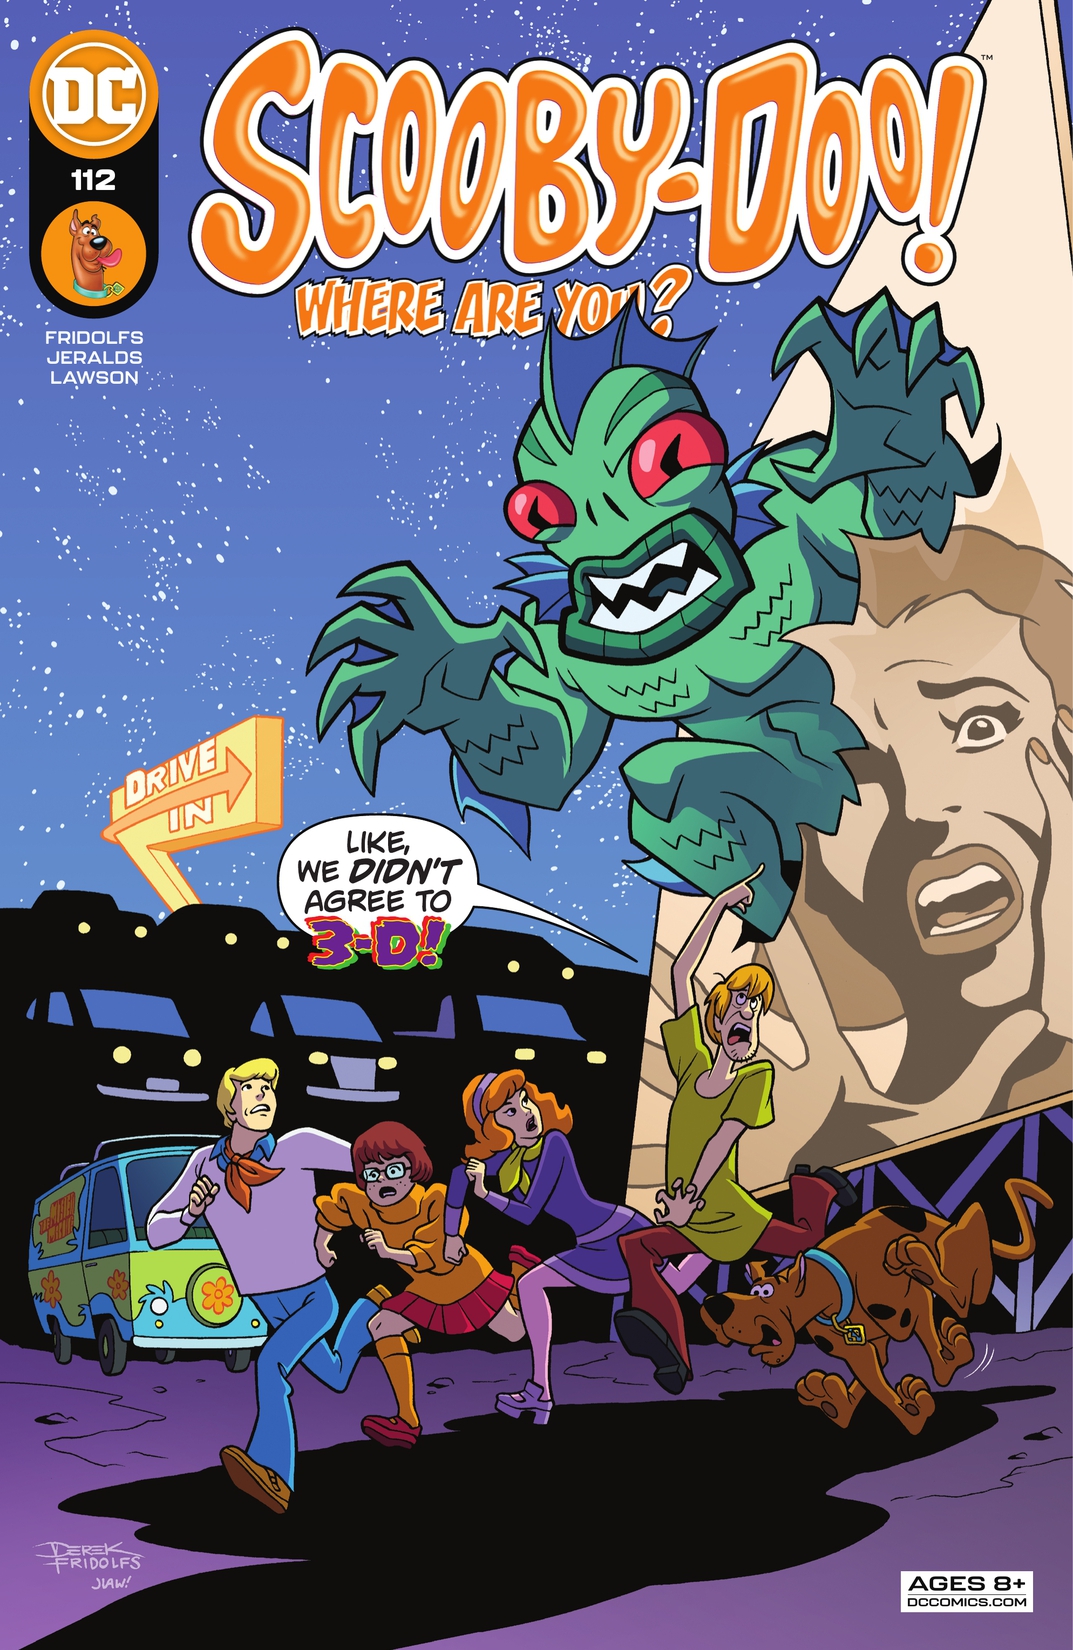 Scooby-Doo, Where Are You? #112 preview images